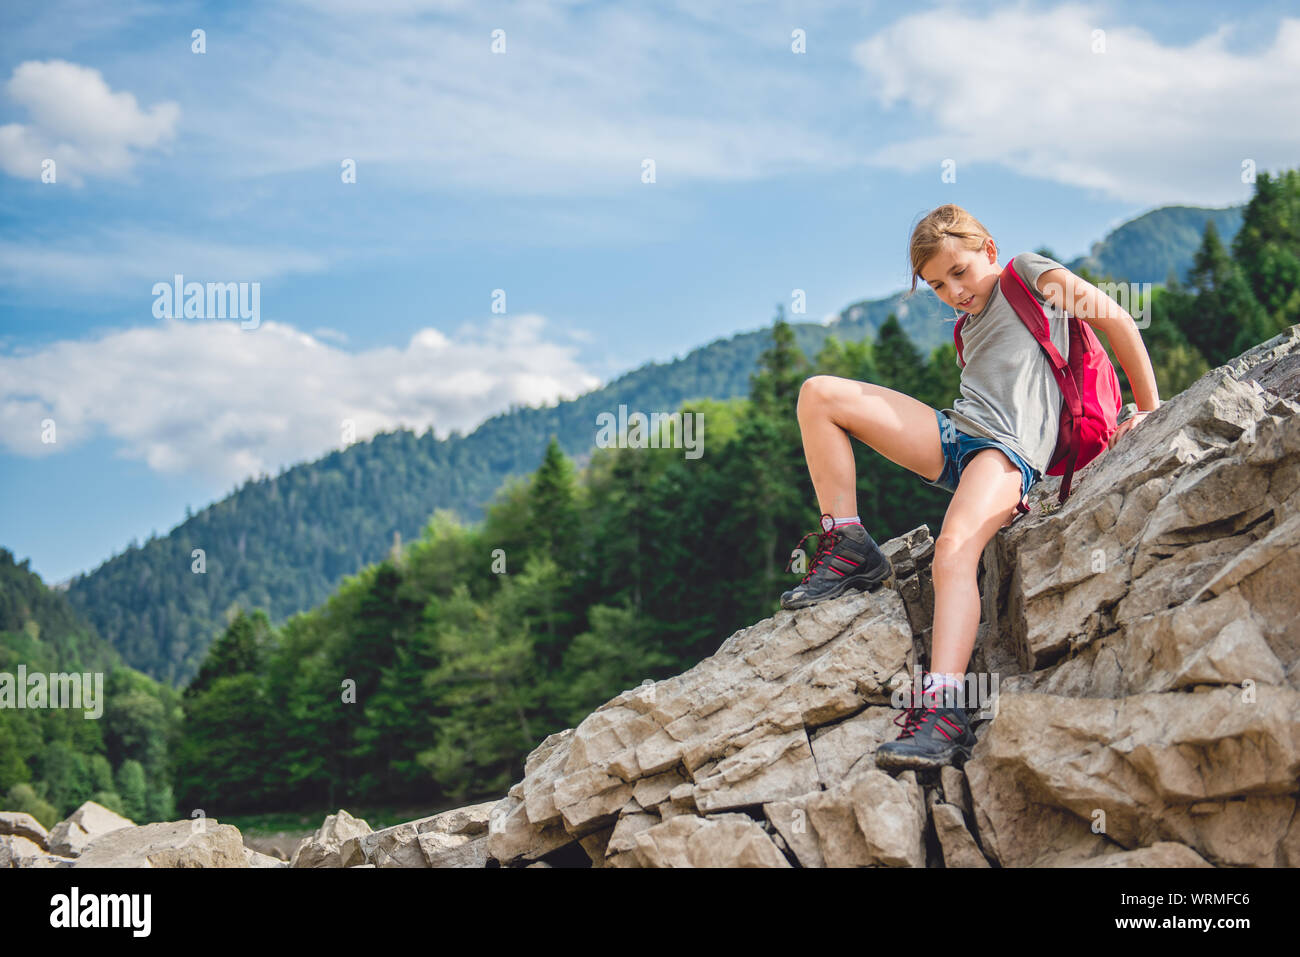 Hiker wearing grey shirt and backpack descends the mountain Stock Photo